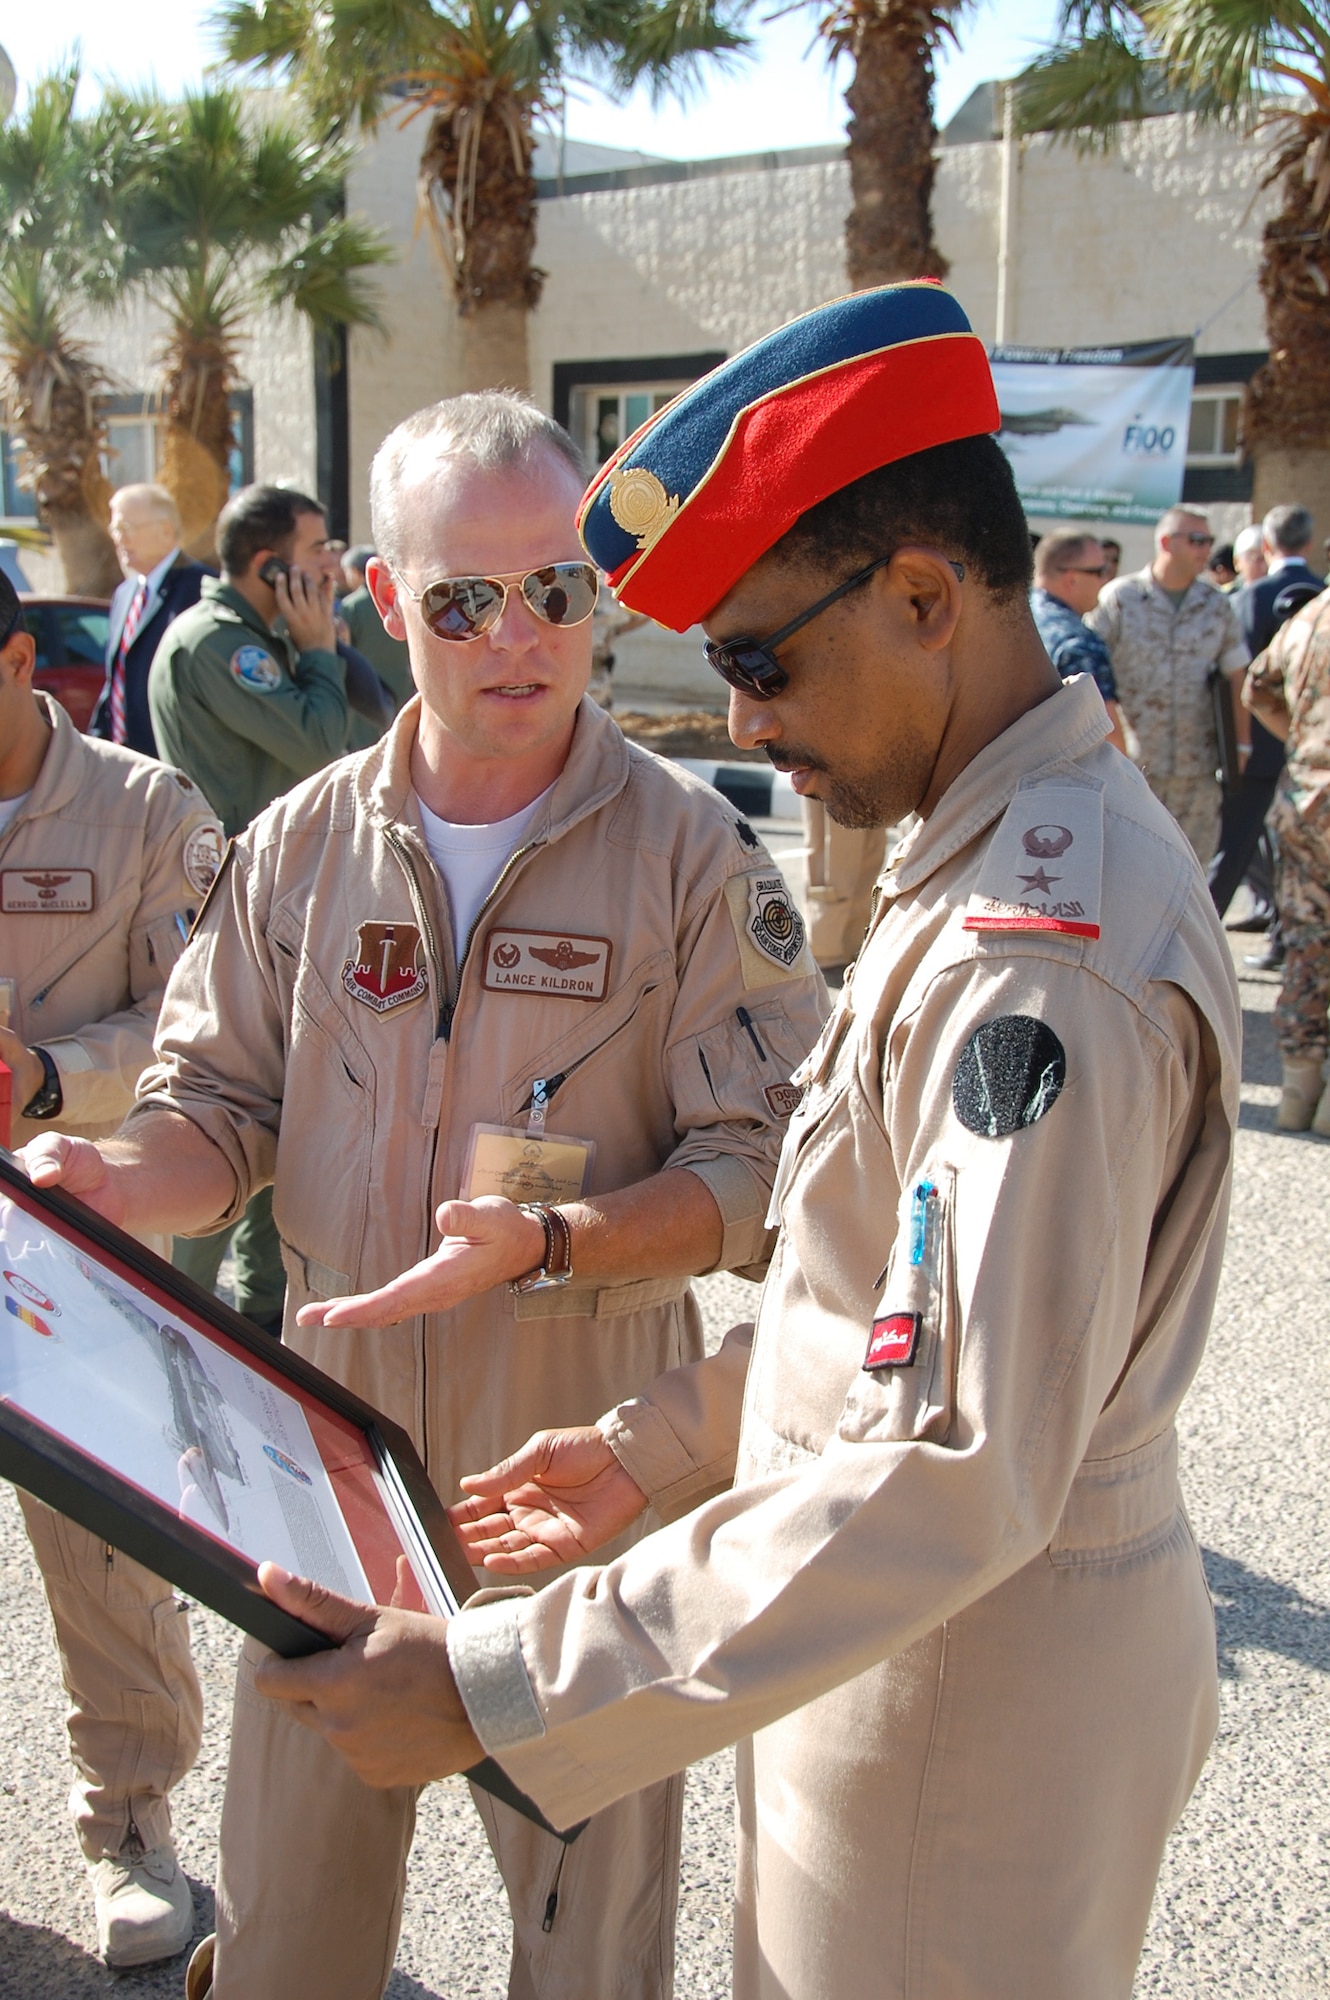 Maj. Adel H. Bin Sanqour, of the United Arab Emirates air force, receives an appreciation plaque from Lt. Col. Lance Kildron Nov. 2, 2010, after the closing ceremonies at Falcon Air Meet 2010 in Azraq, Jordan. Colonel Kildron is the 77th Fighter Squadron commander. (U.S. Air Force photo/Alan Black)